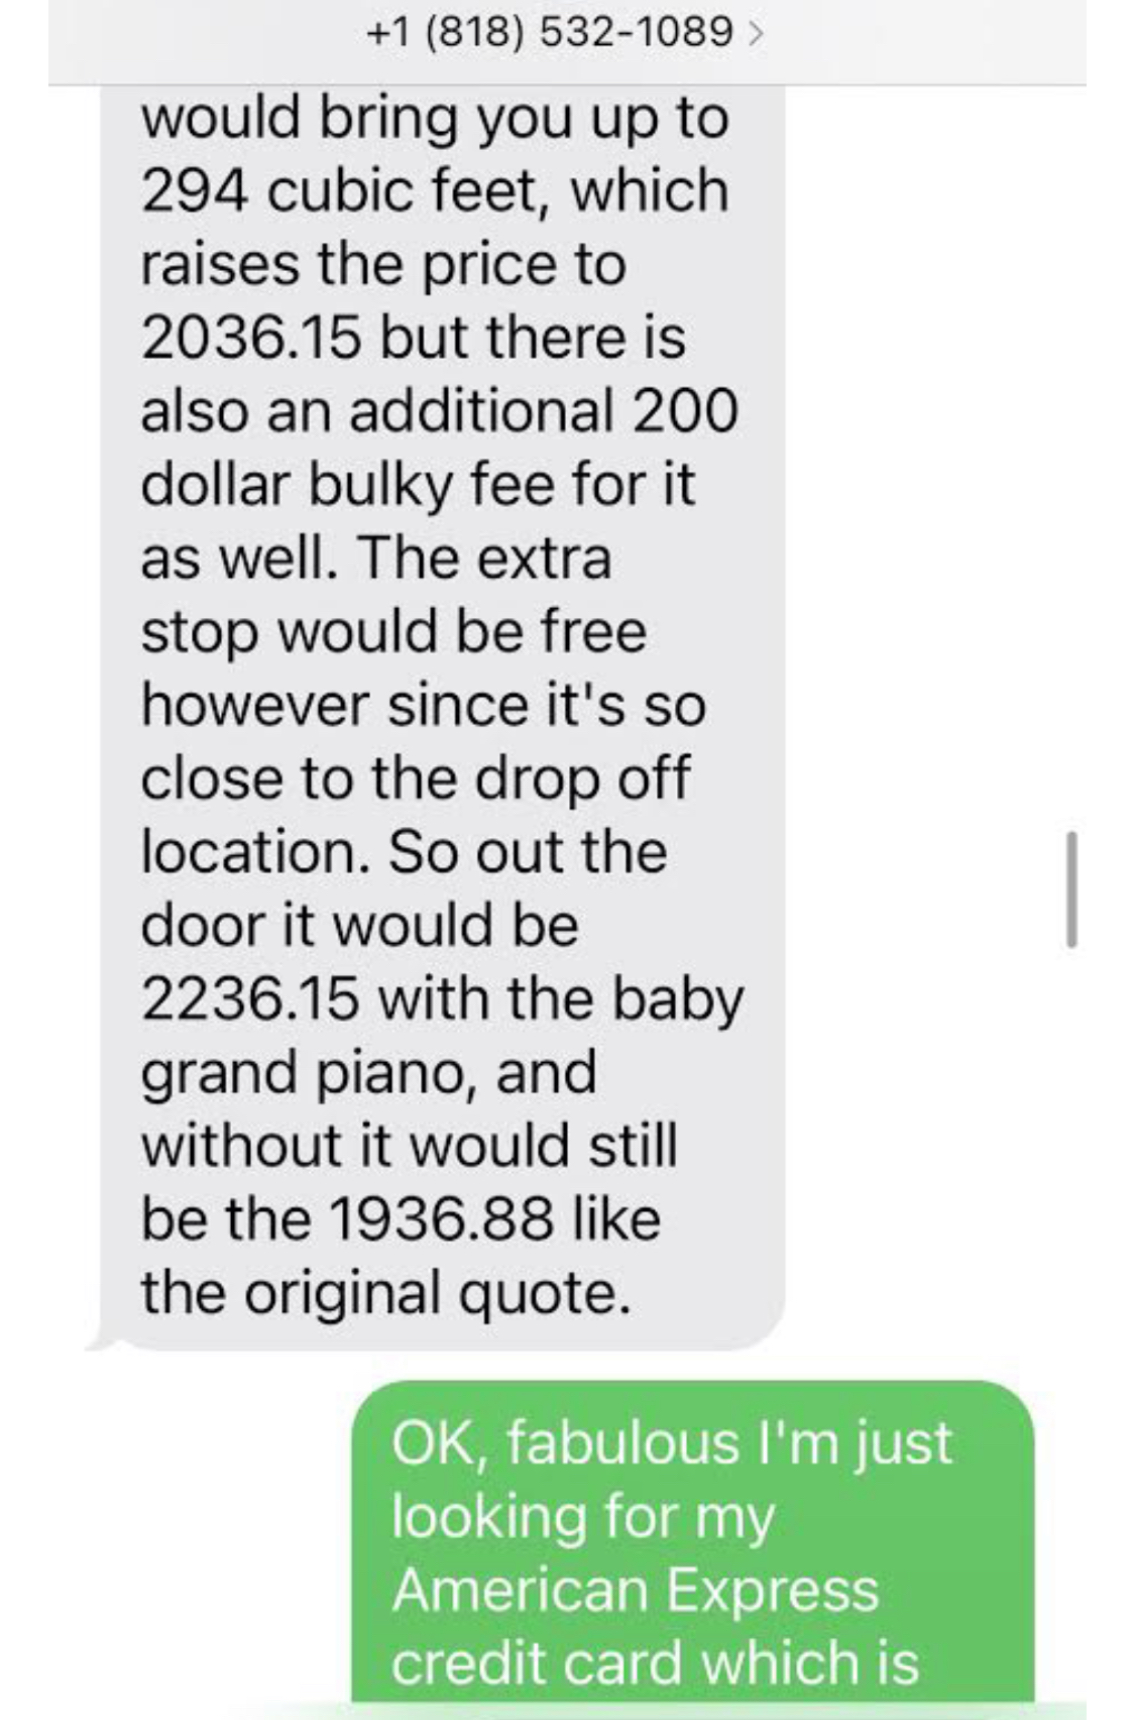 Original text for “Out the door cost” from them